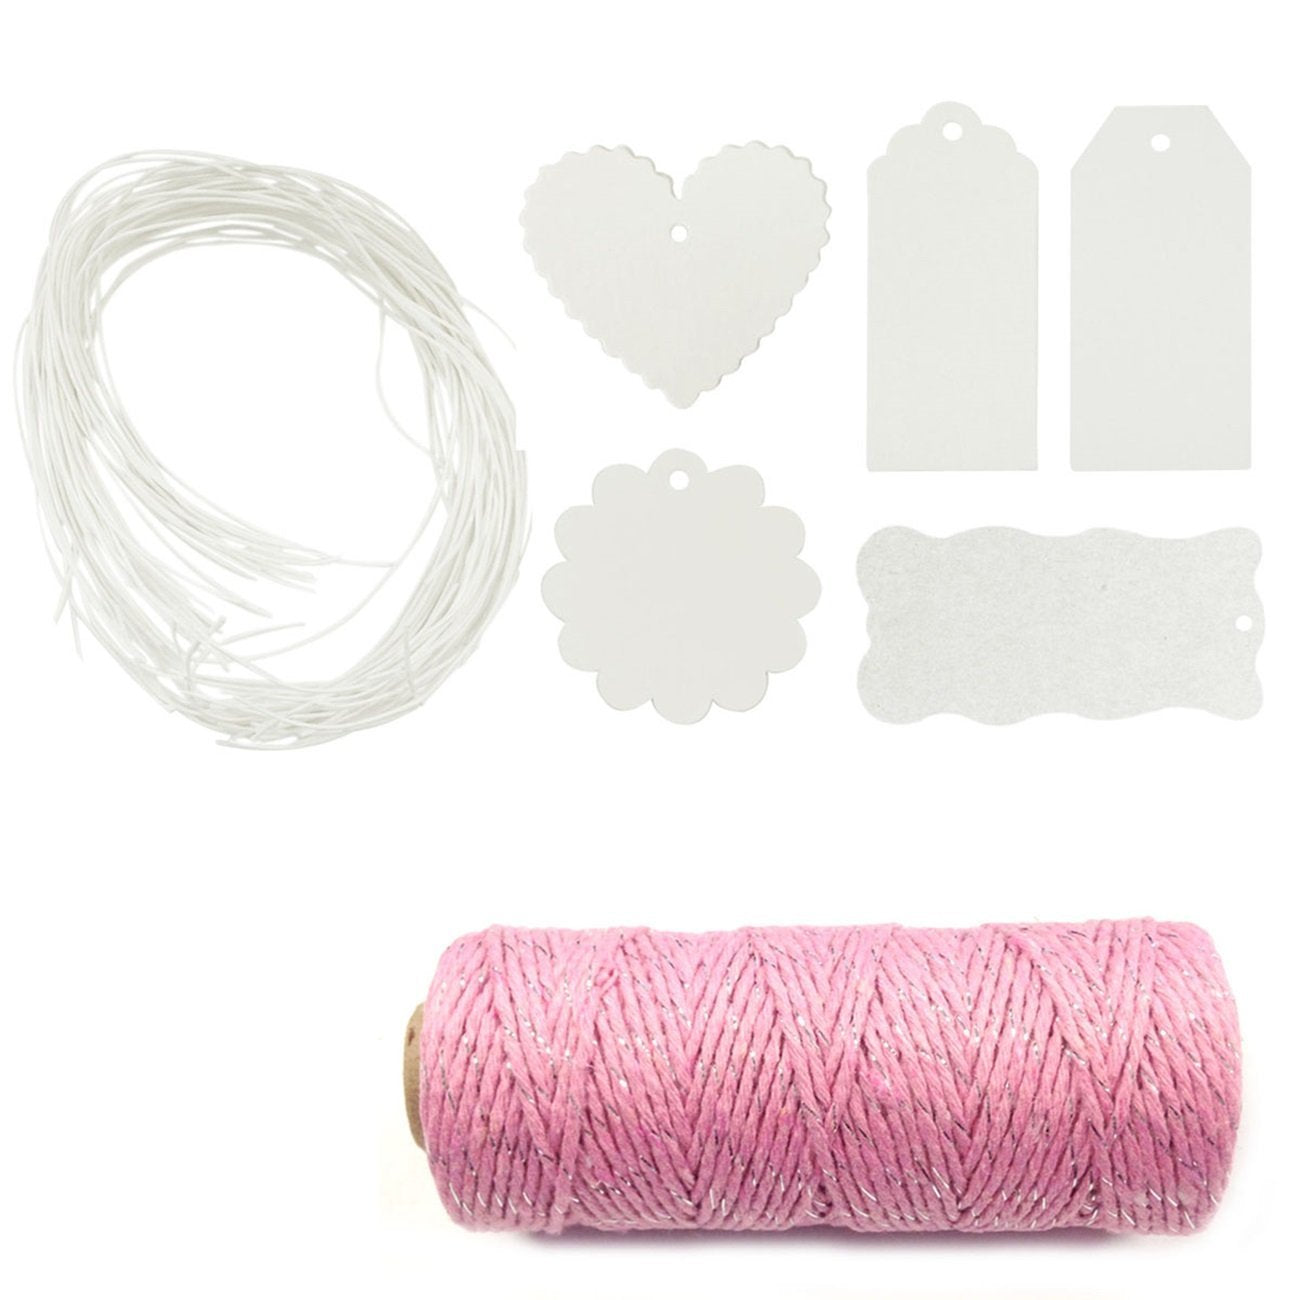 Wrapables 100 White Gift Tags with Free Cut String + Cotton Baker's Twine 12ply 110 Yard, Pink/Metallic Silver